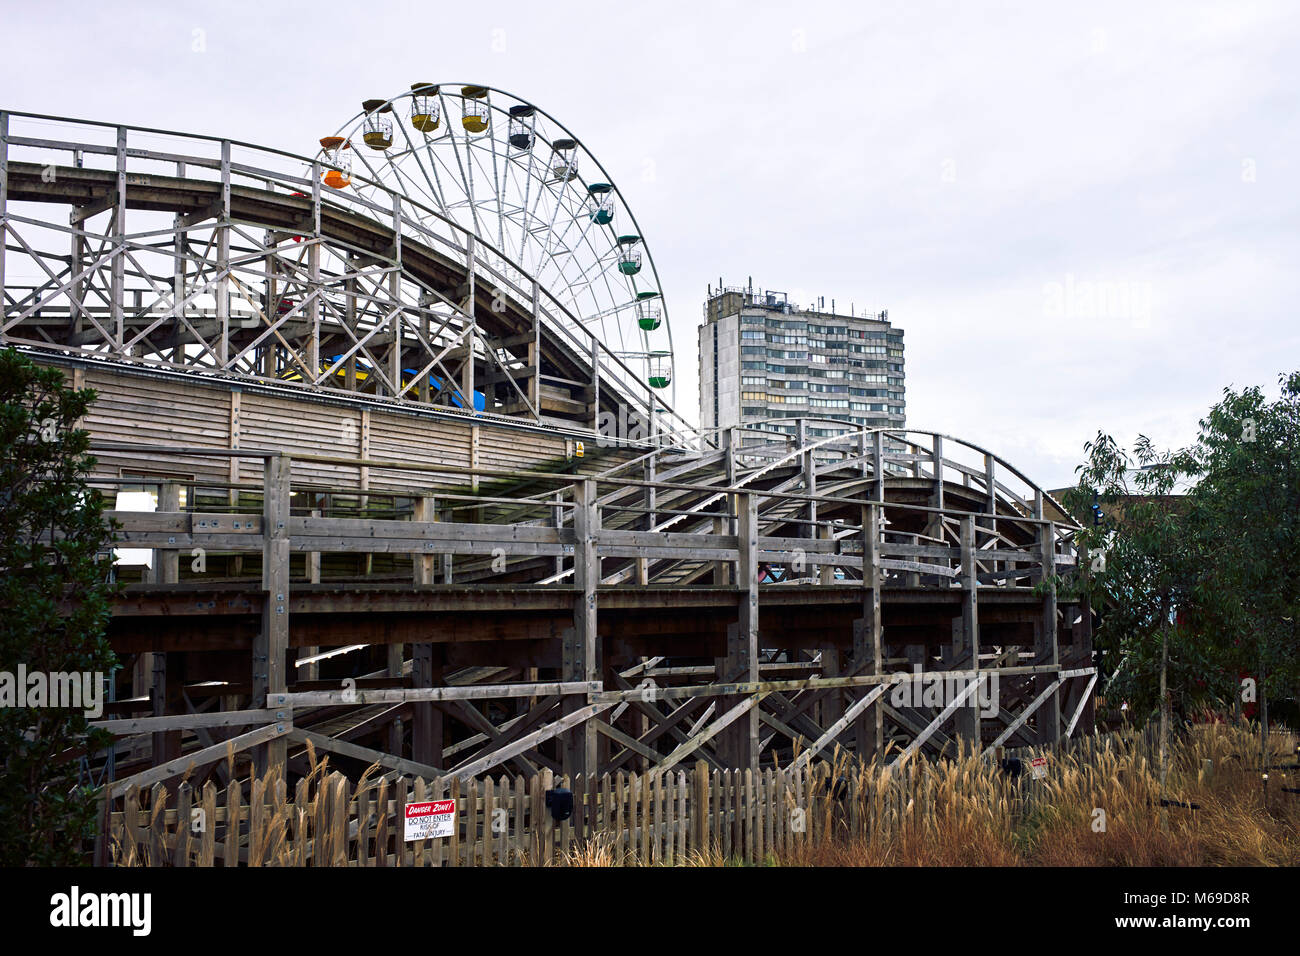 Big wheel and roller coaster with block of flats in background at Dreamland, Margate Stock Photo